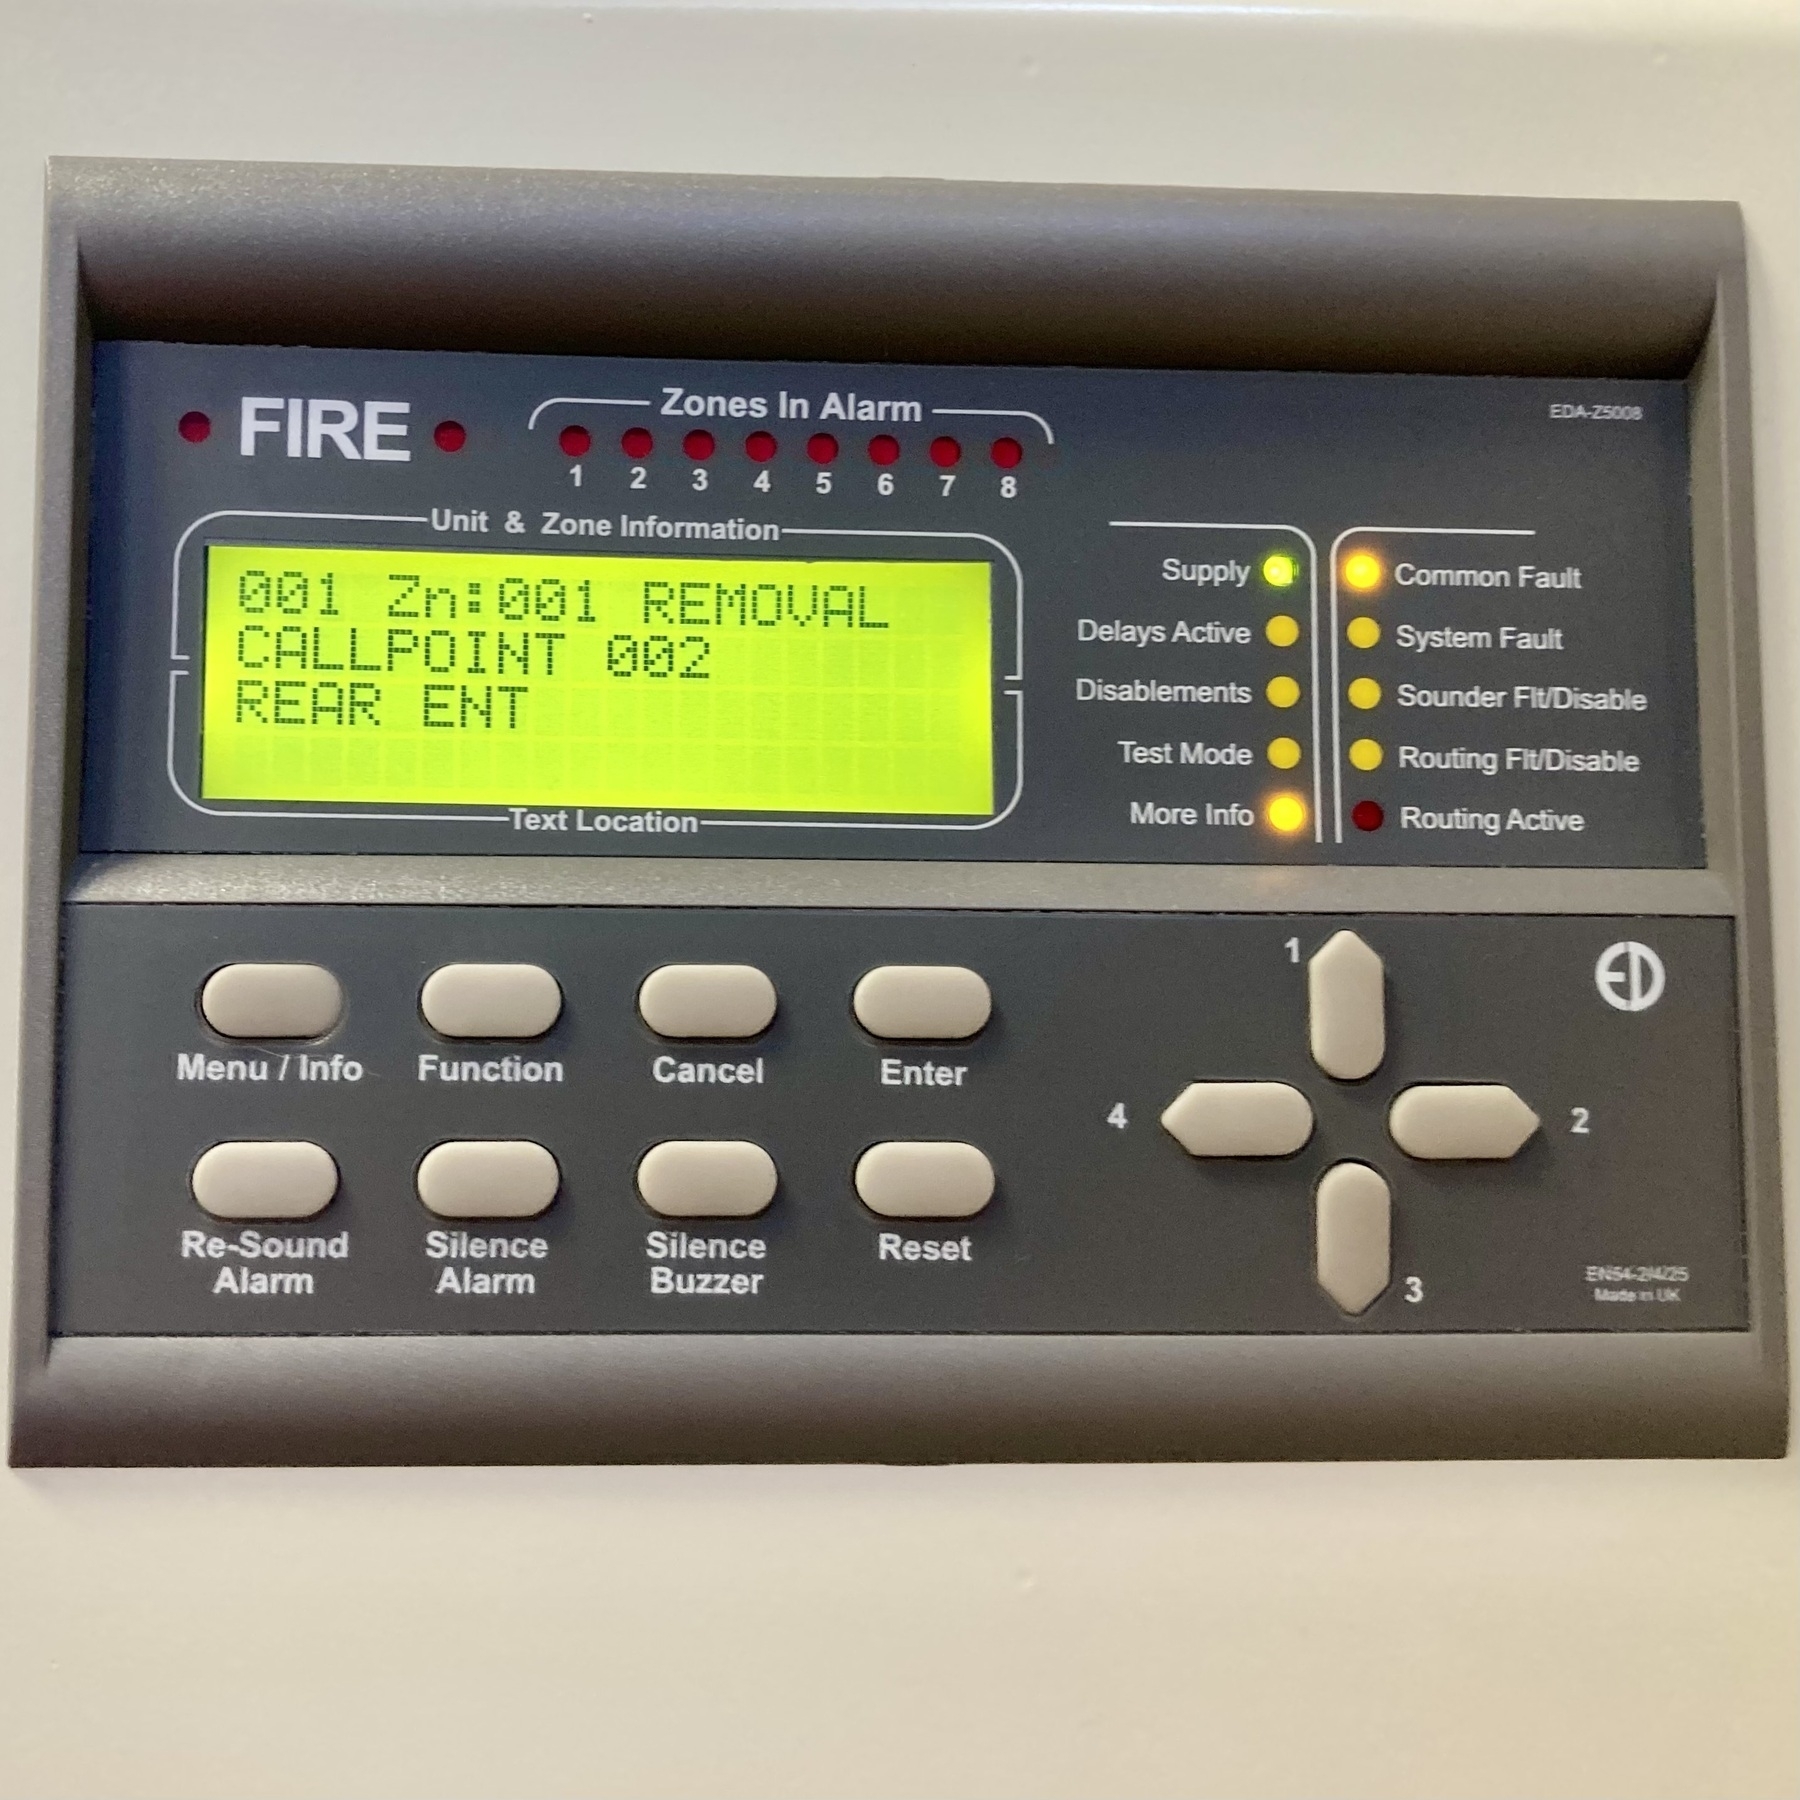 The green illuminated LCD display of a fire alarm panel shows a fault